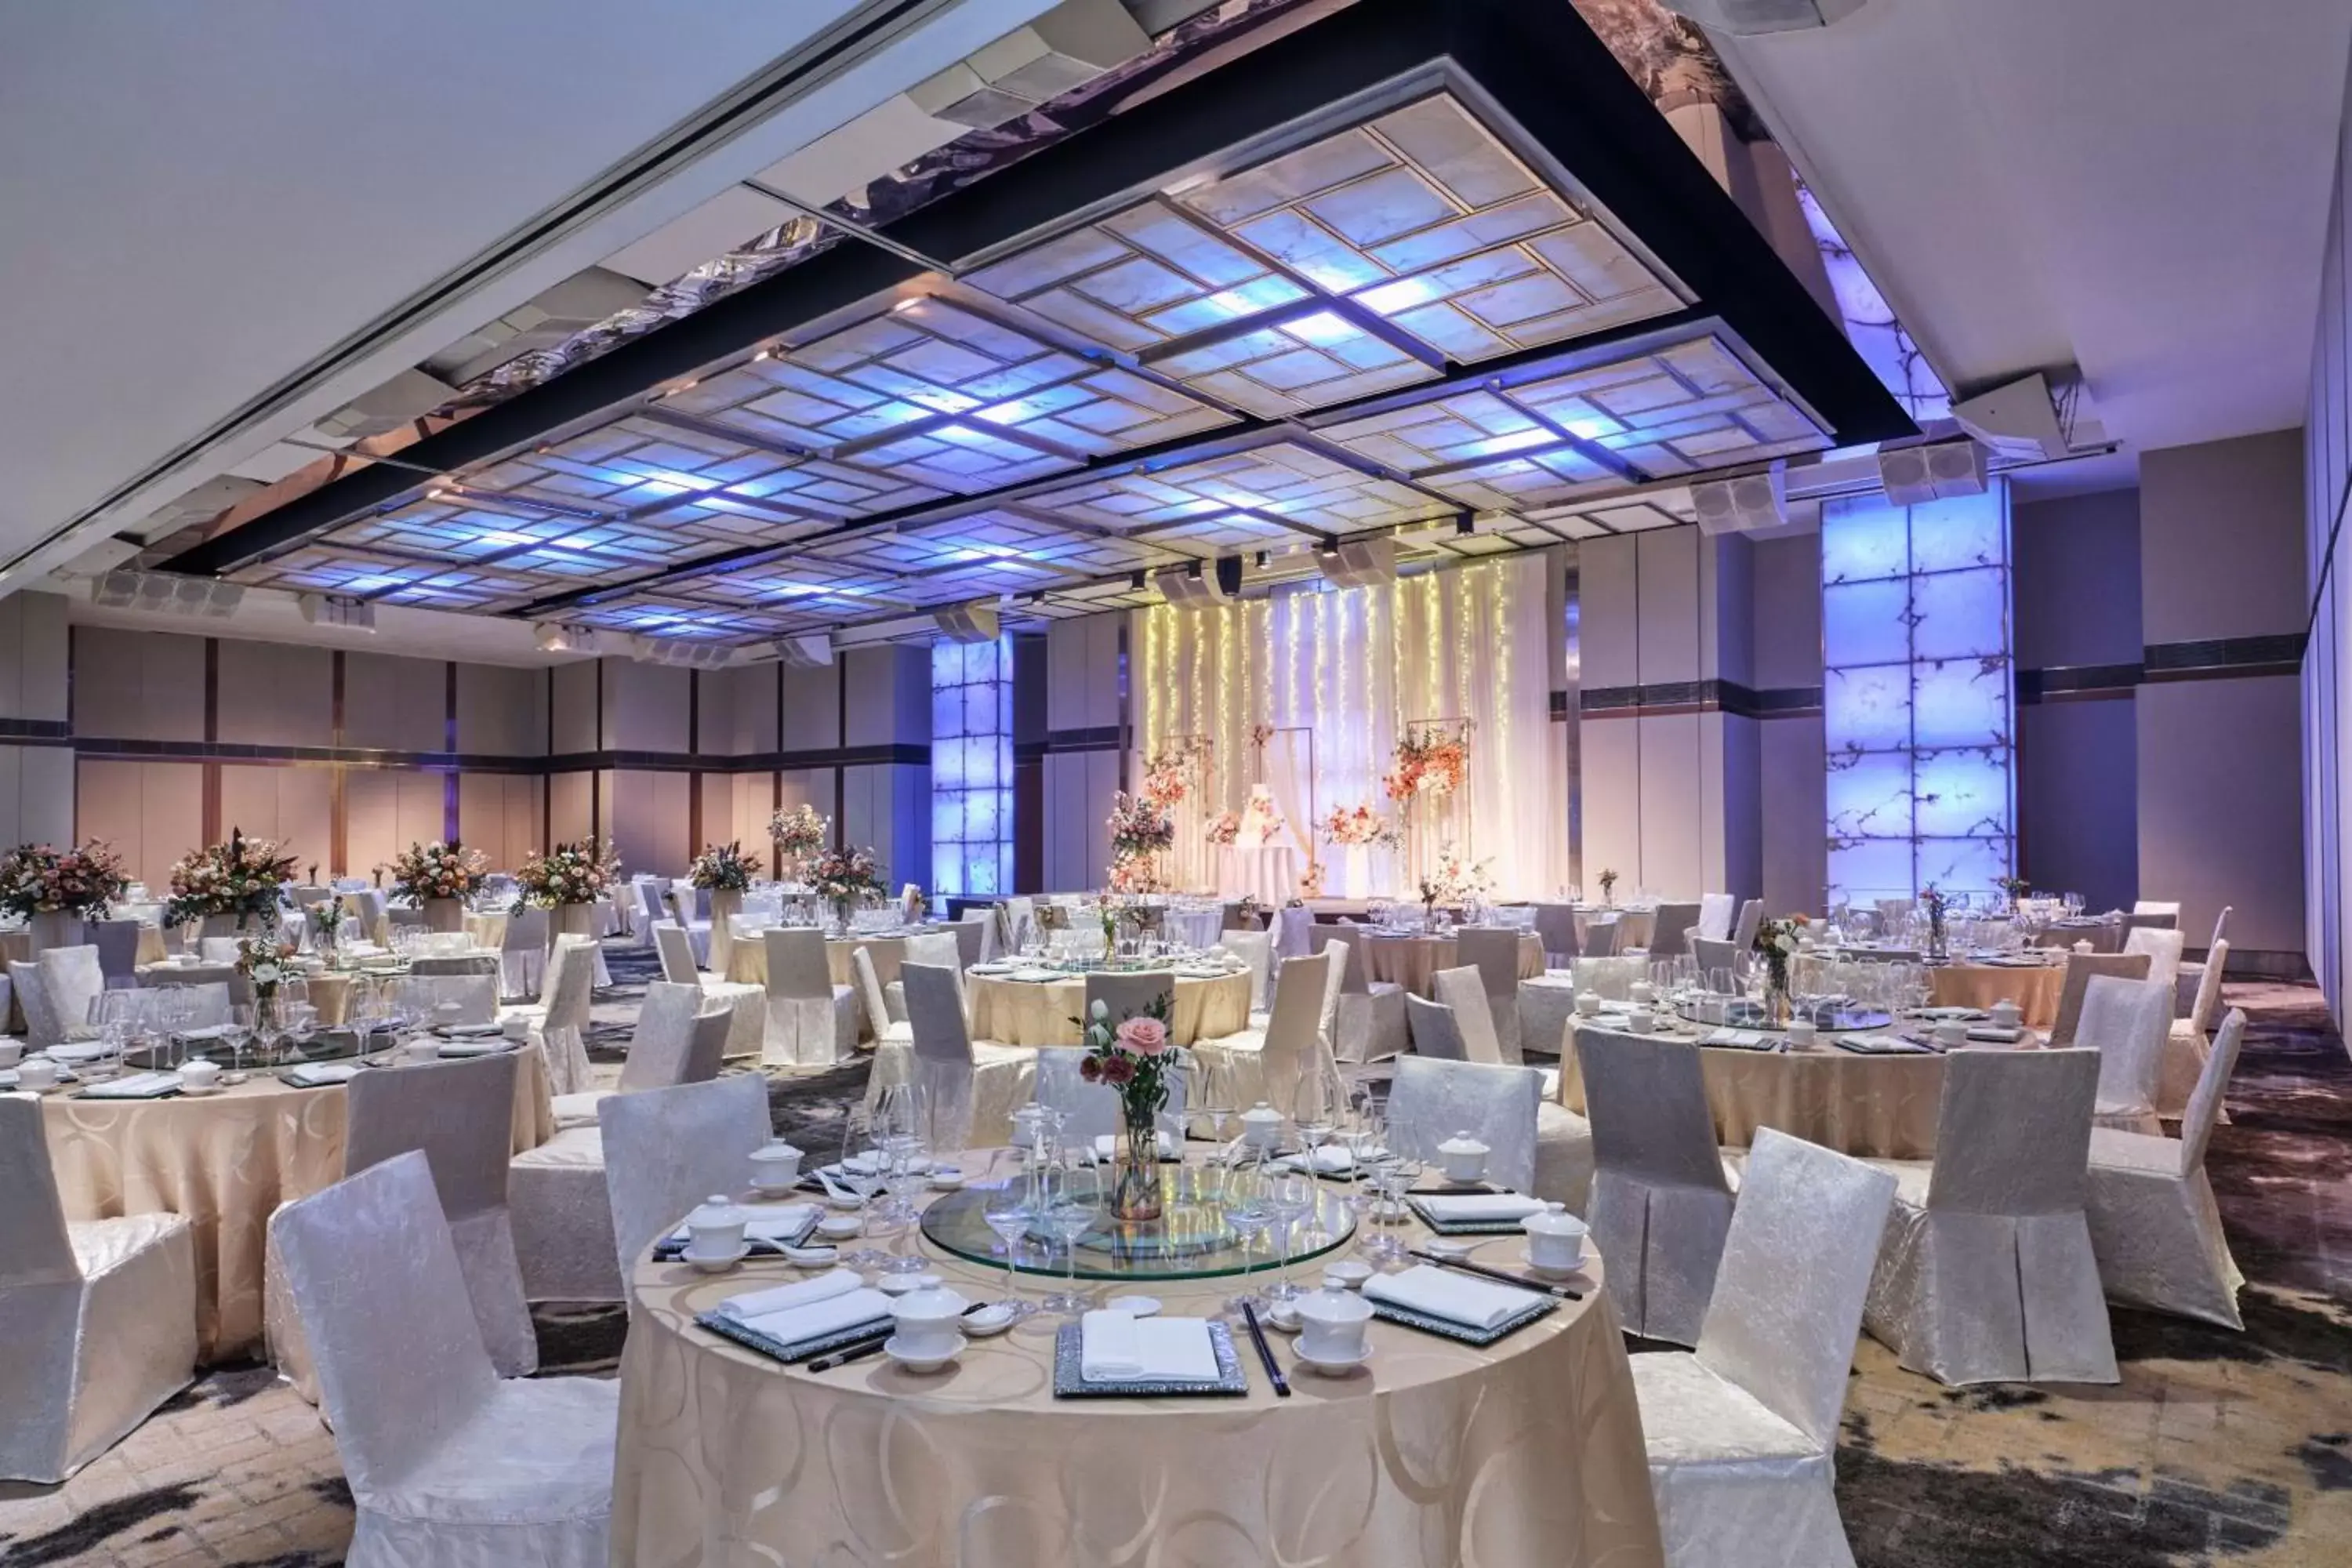 Banquet/Function facilities, Banquet Facilities in Singapore Marriott Tang Plaza Hotel